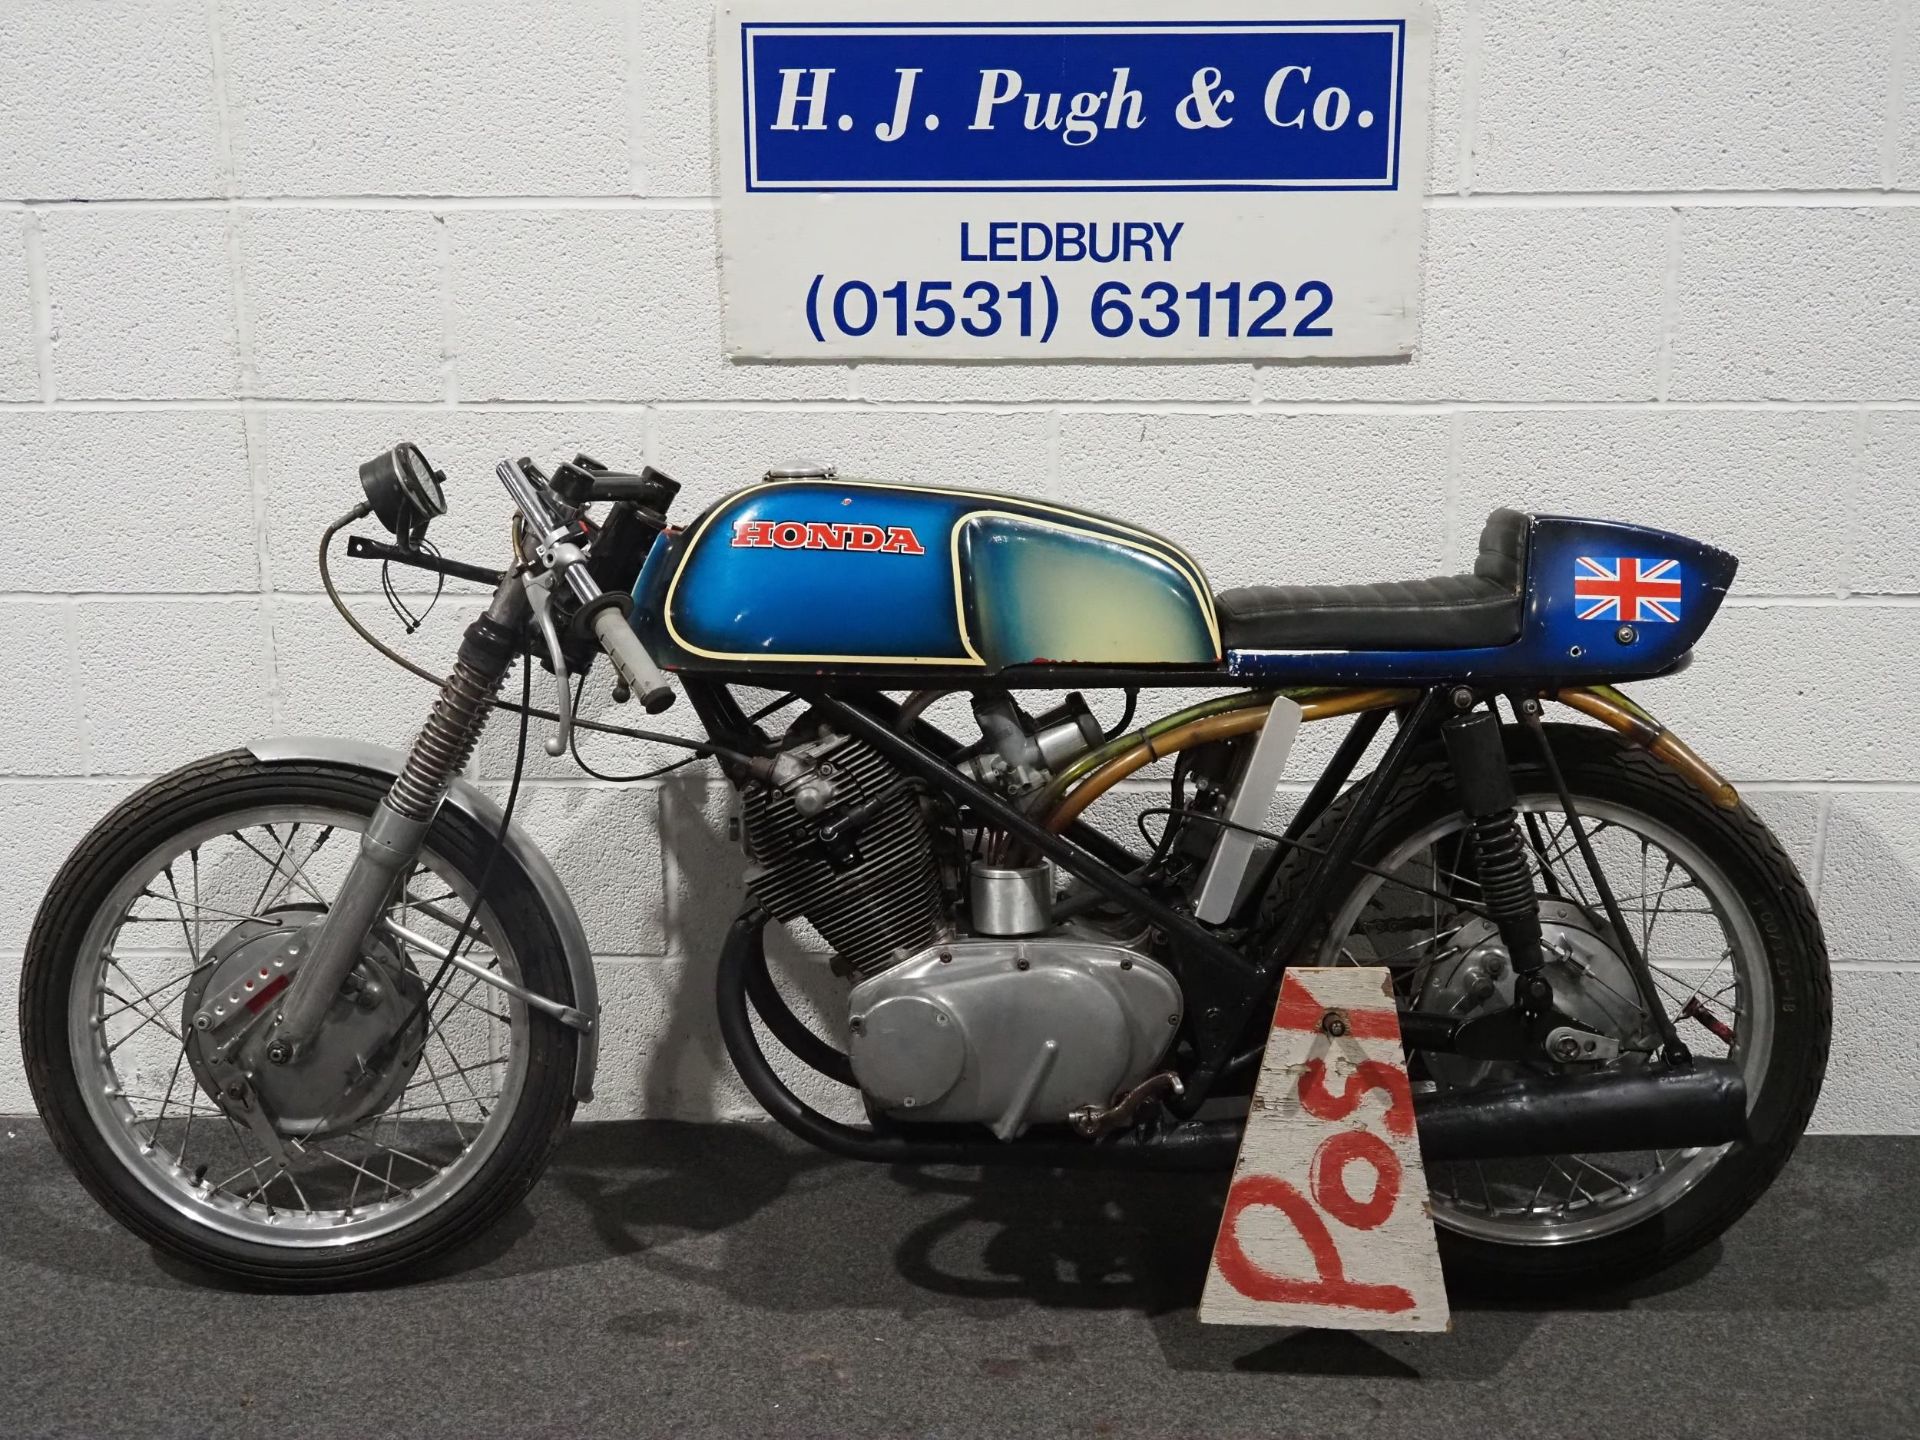 Honda CB72 race bike in Seely type frame with Norton forks and electronic ignition. Was being - Image 5 of 5